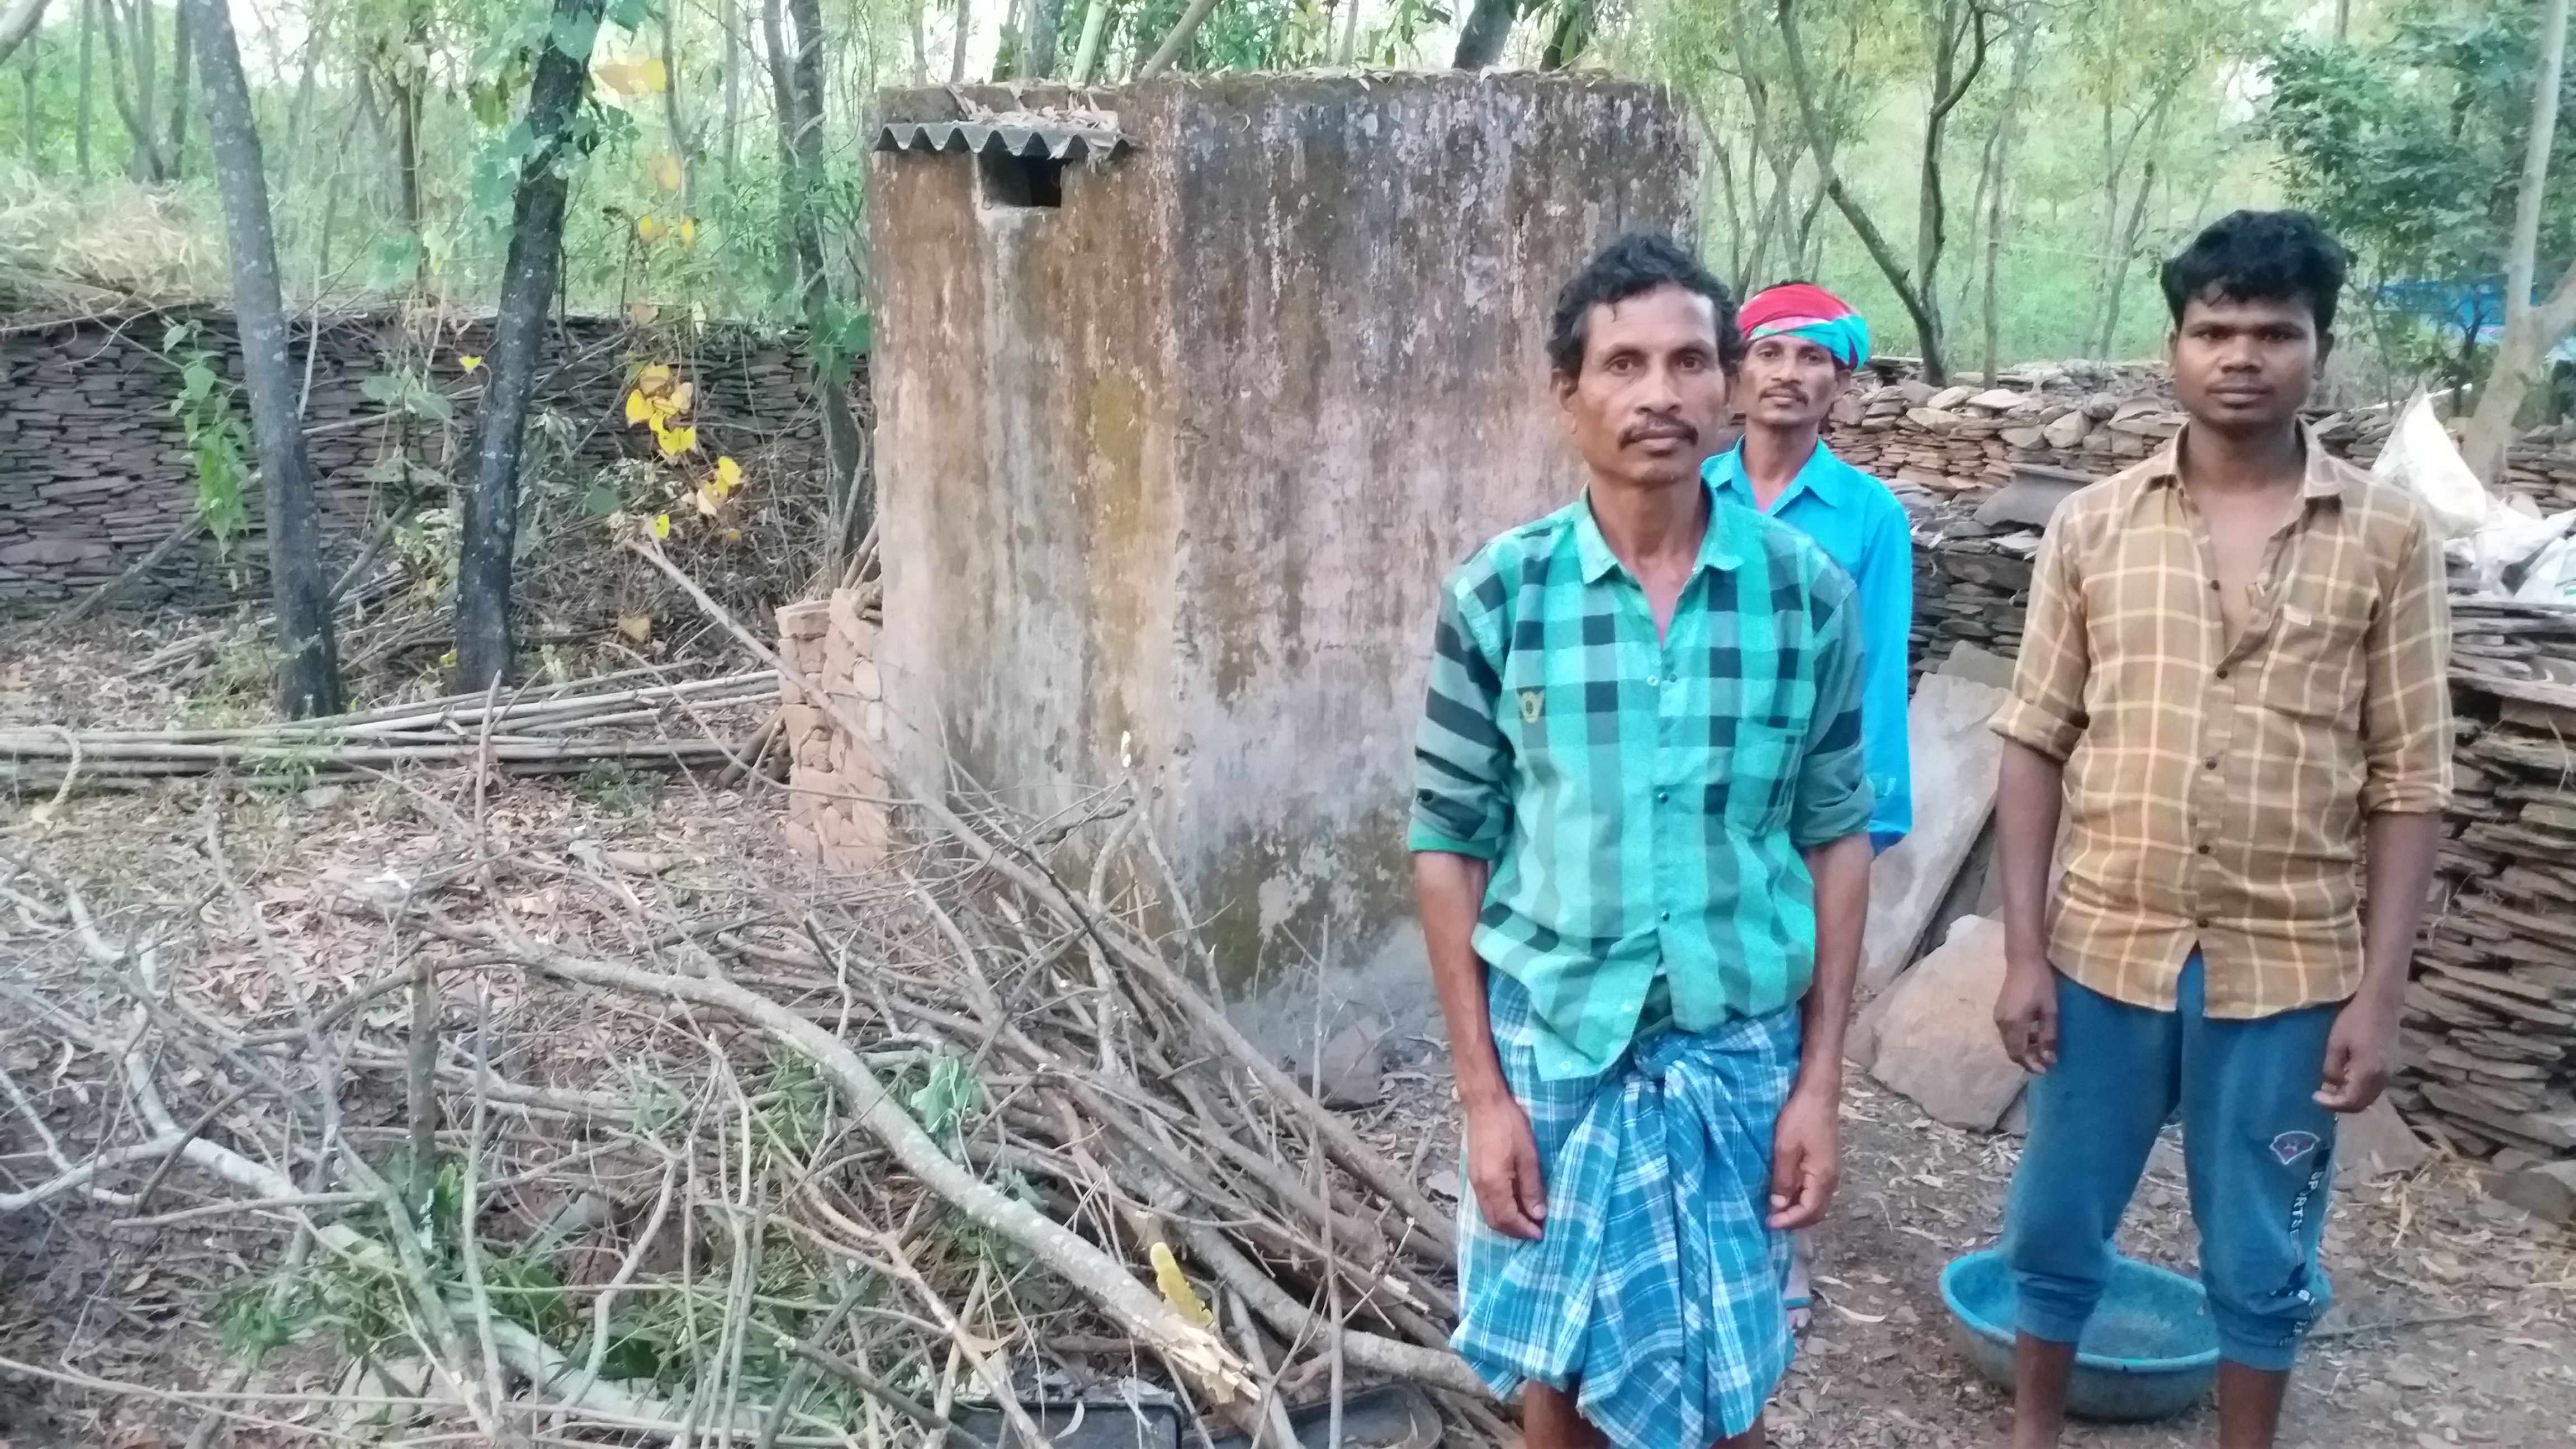 lack of toilets in many villages in bastar villagers defecate in open